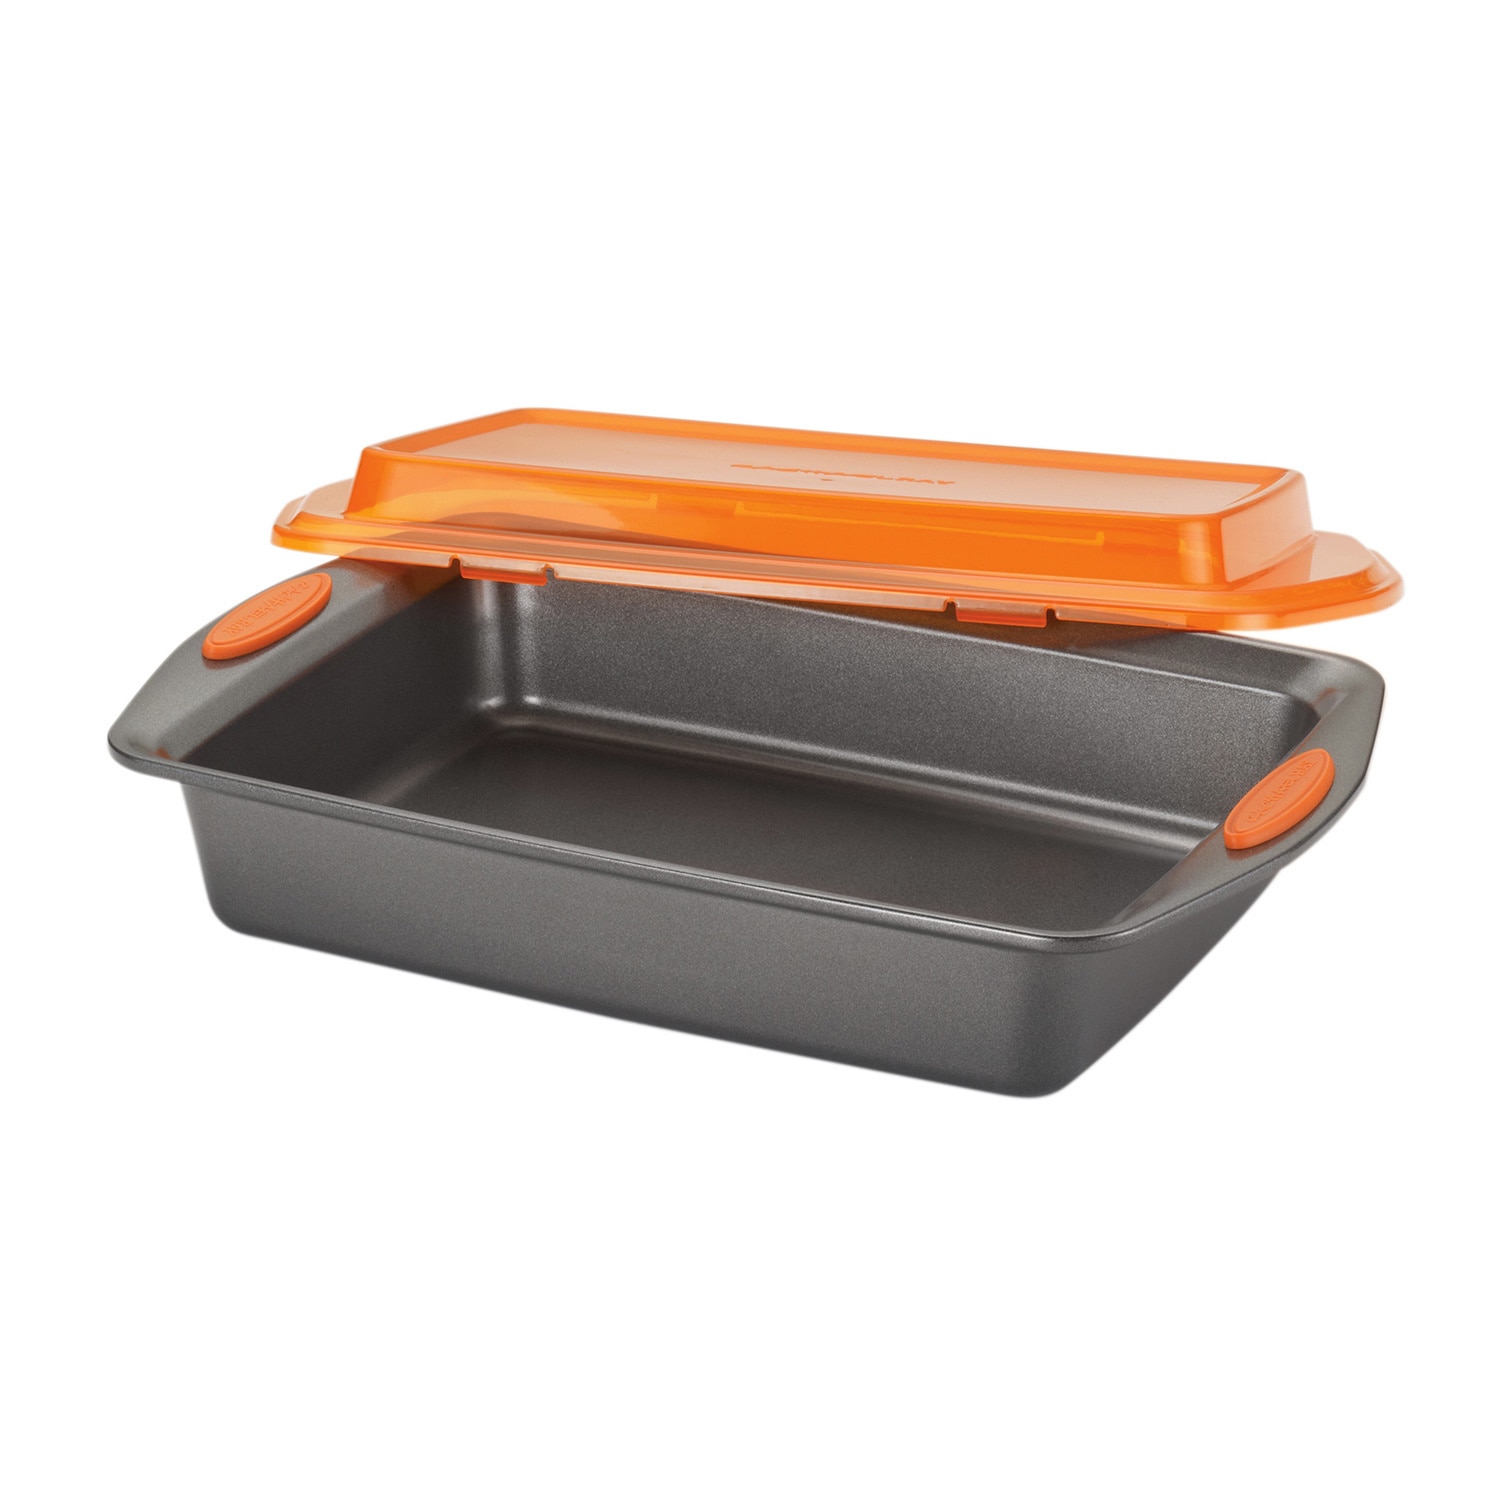 https://ak1.ostkcdn.com/images/products/8891291/Rachael-Ray-Nonstick-Bakeware-9-x-13-inch-Grey-with-Orange-Lid-and-Handles-Covered-Cake-Pan-de691bc6-f068-4754-8c5d-81cc8ec1f465.jpg